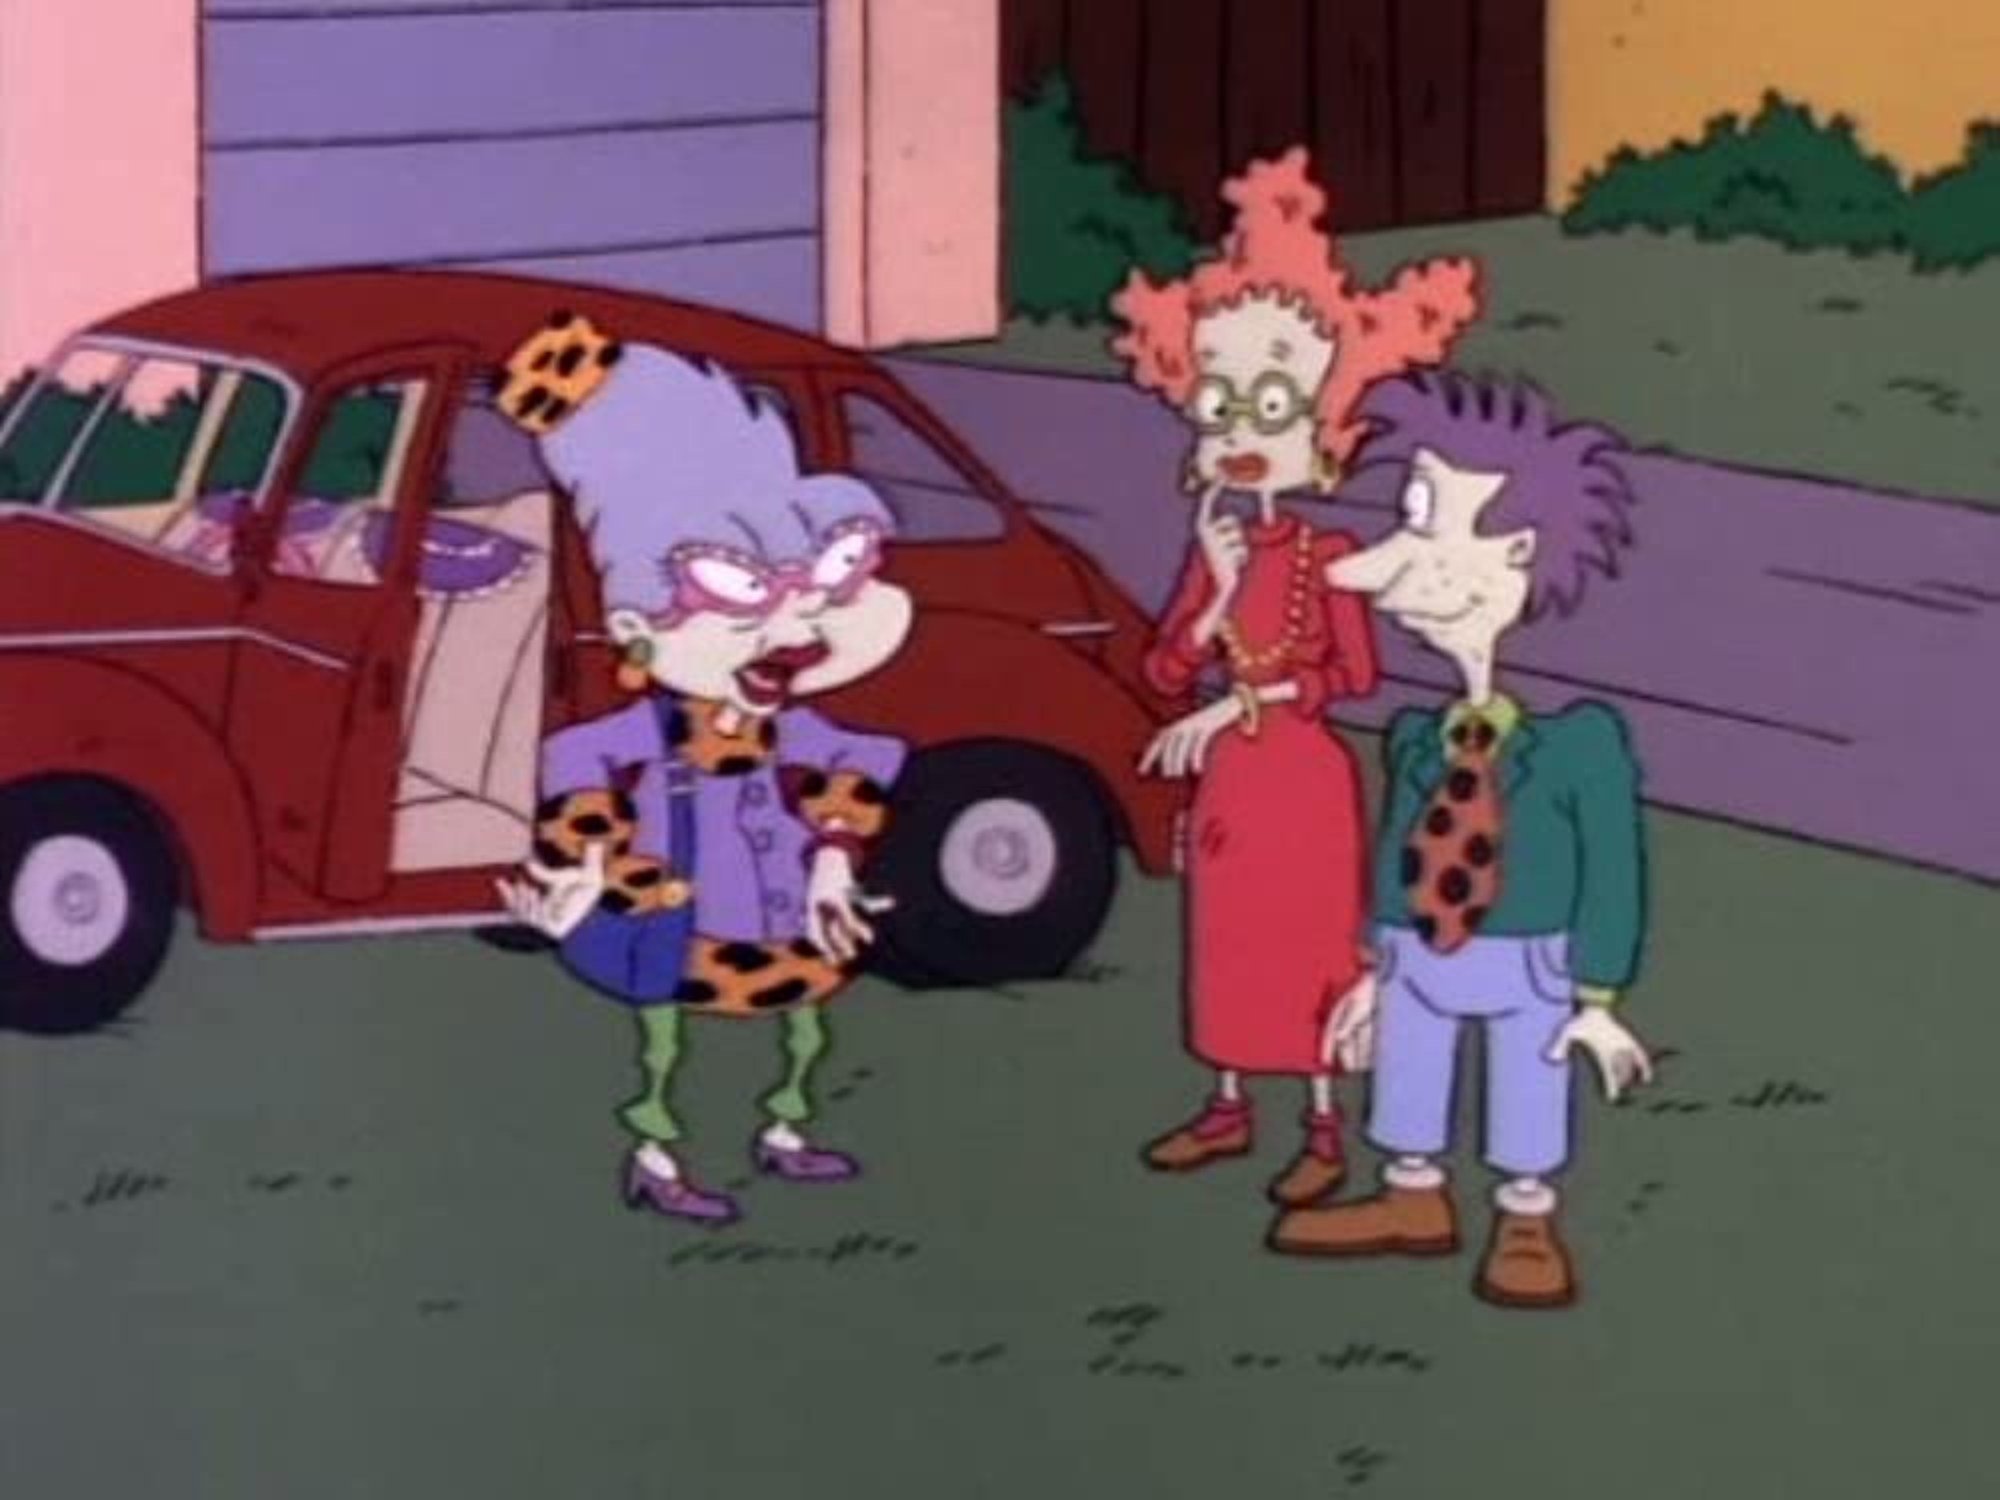 'Rugrats' episodes Aunt Miriam, Didi Pickles, and Stu Pickles standing outside of Miriam's car on the grass in front of the house.